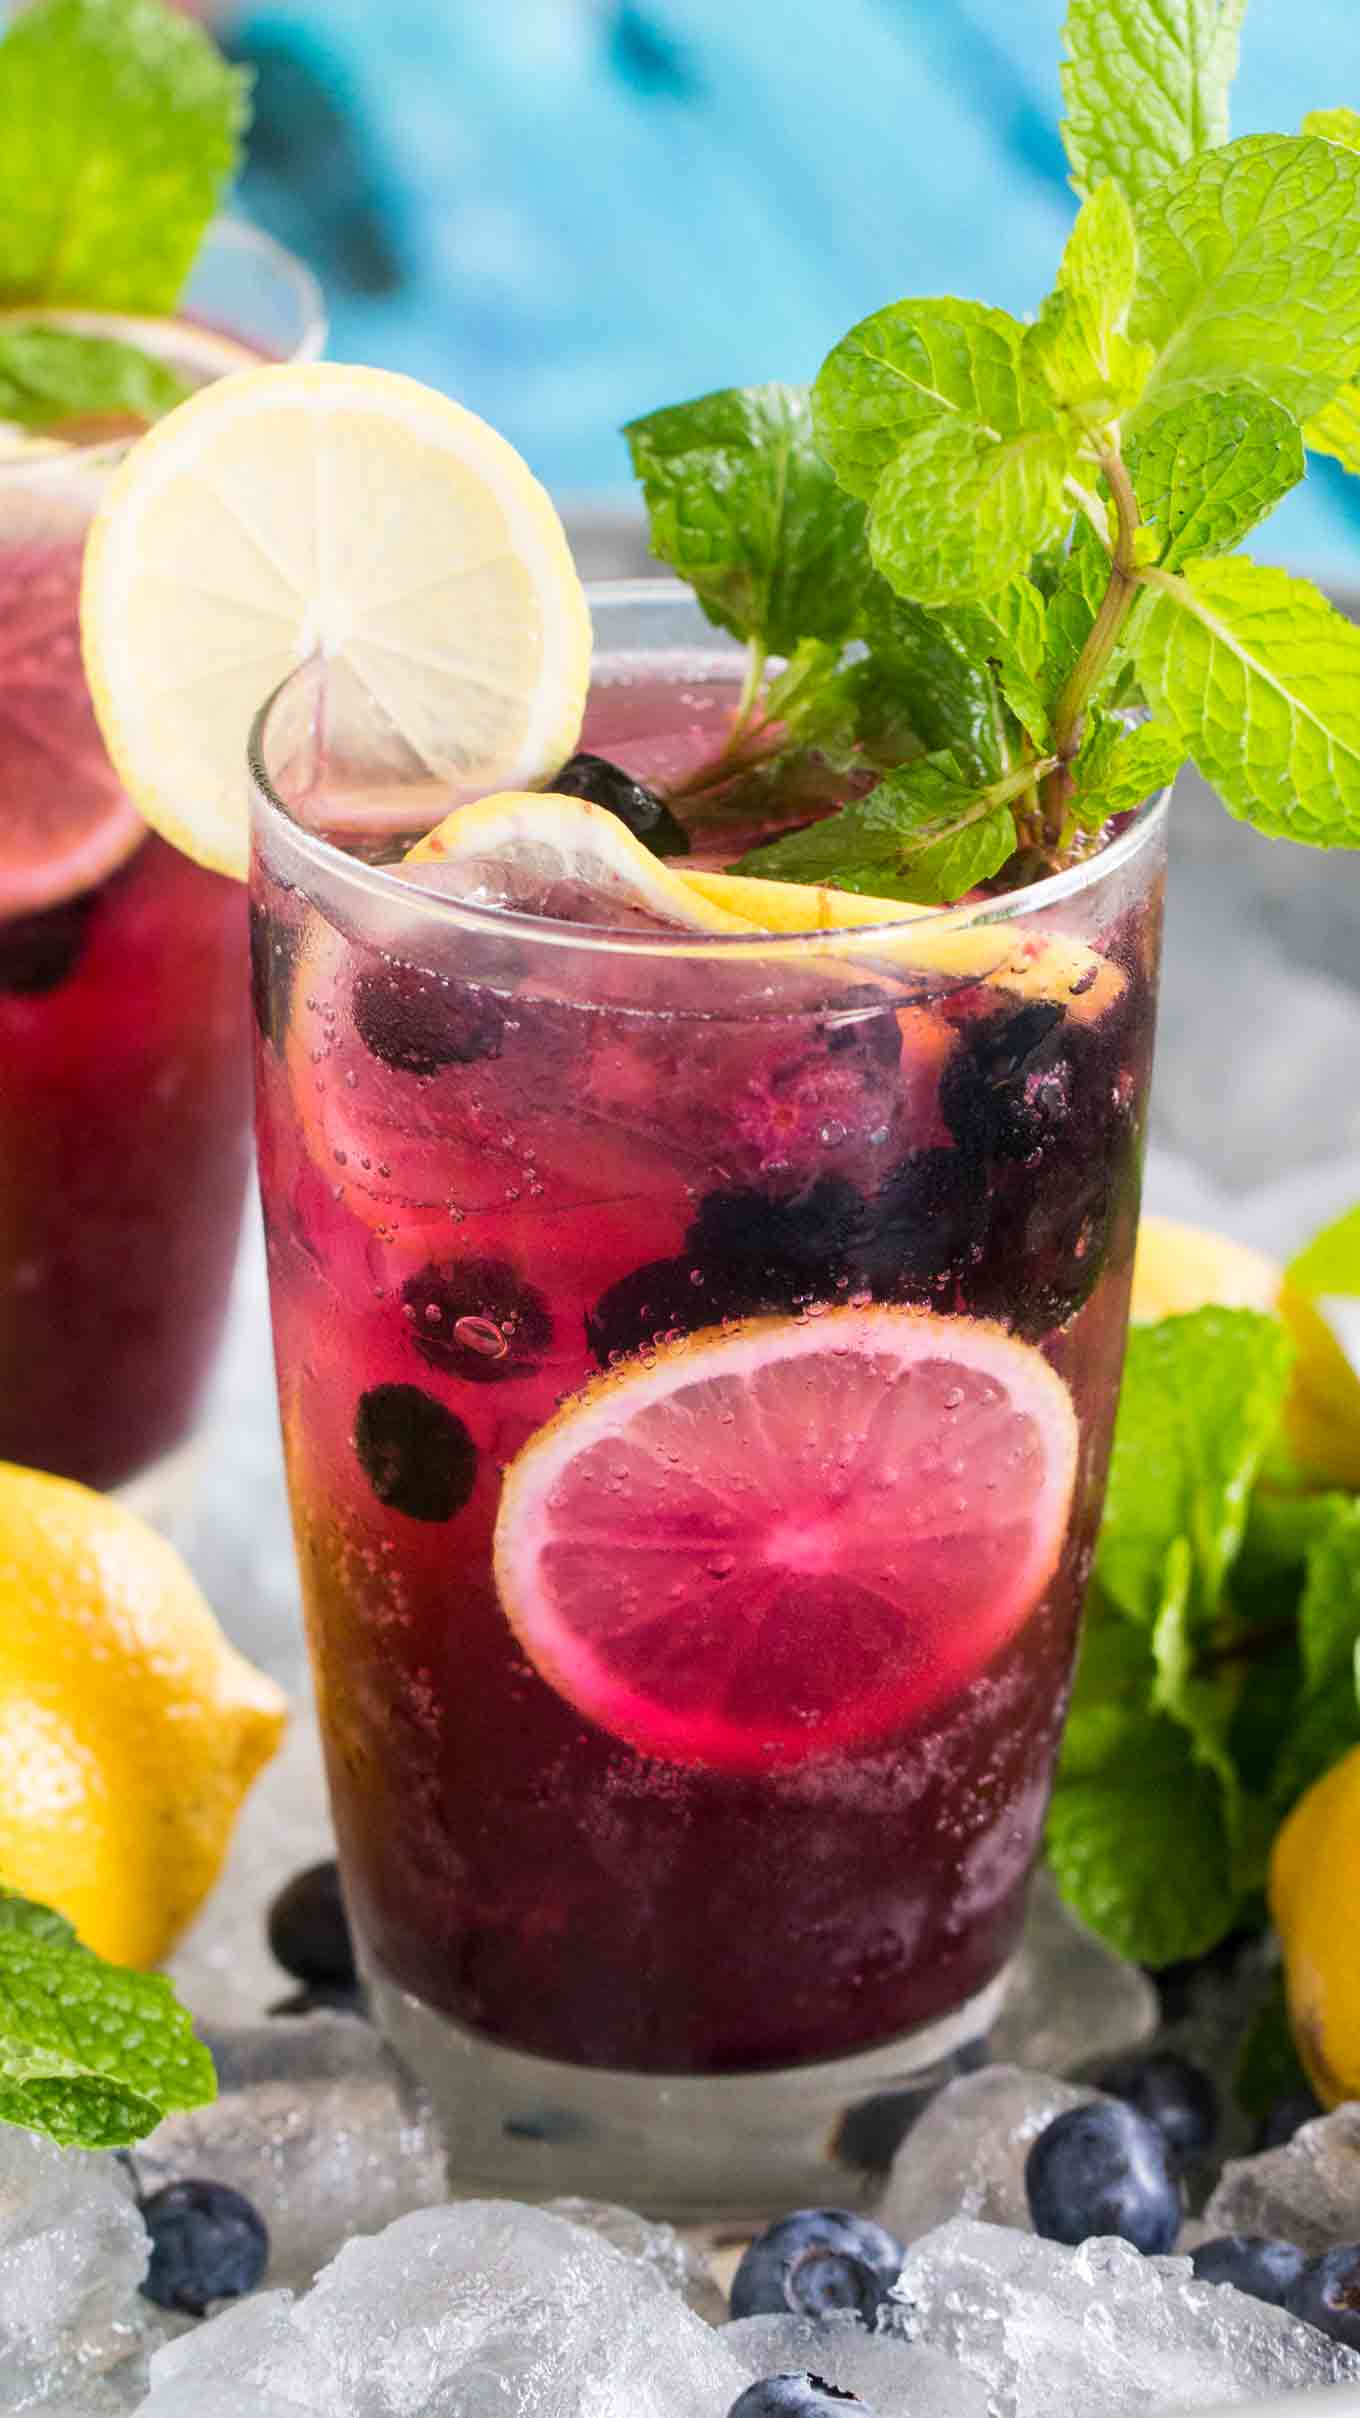 Blueberry Lemonade tastes delicious and refreshing year round. Made easy with sweet blueberry simple syrup and fresh lemon juice.